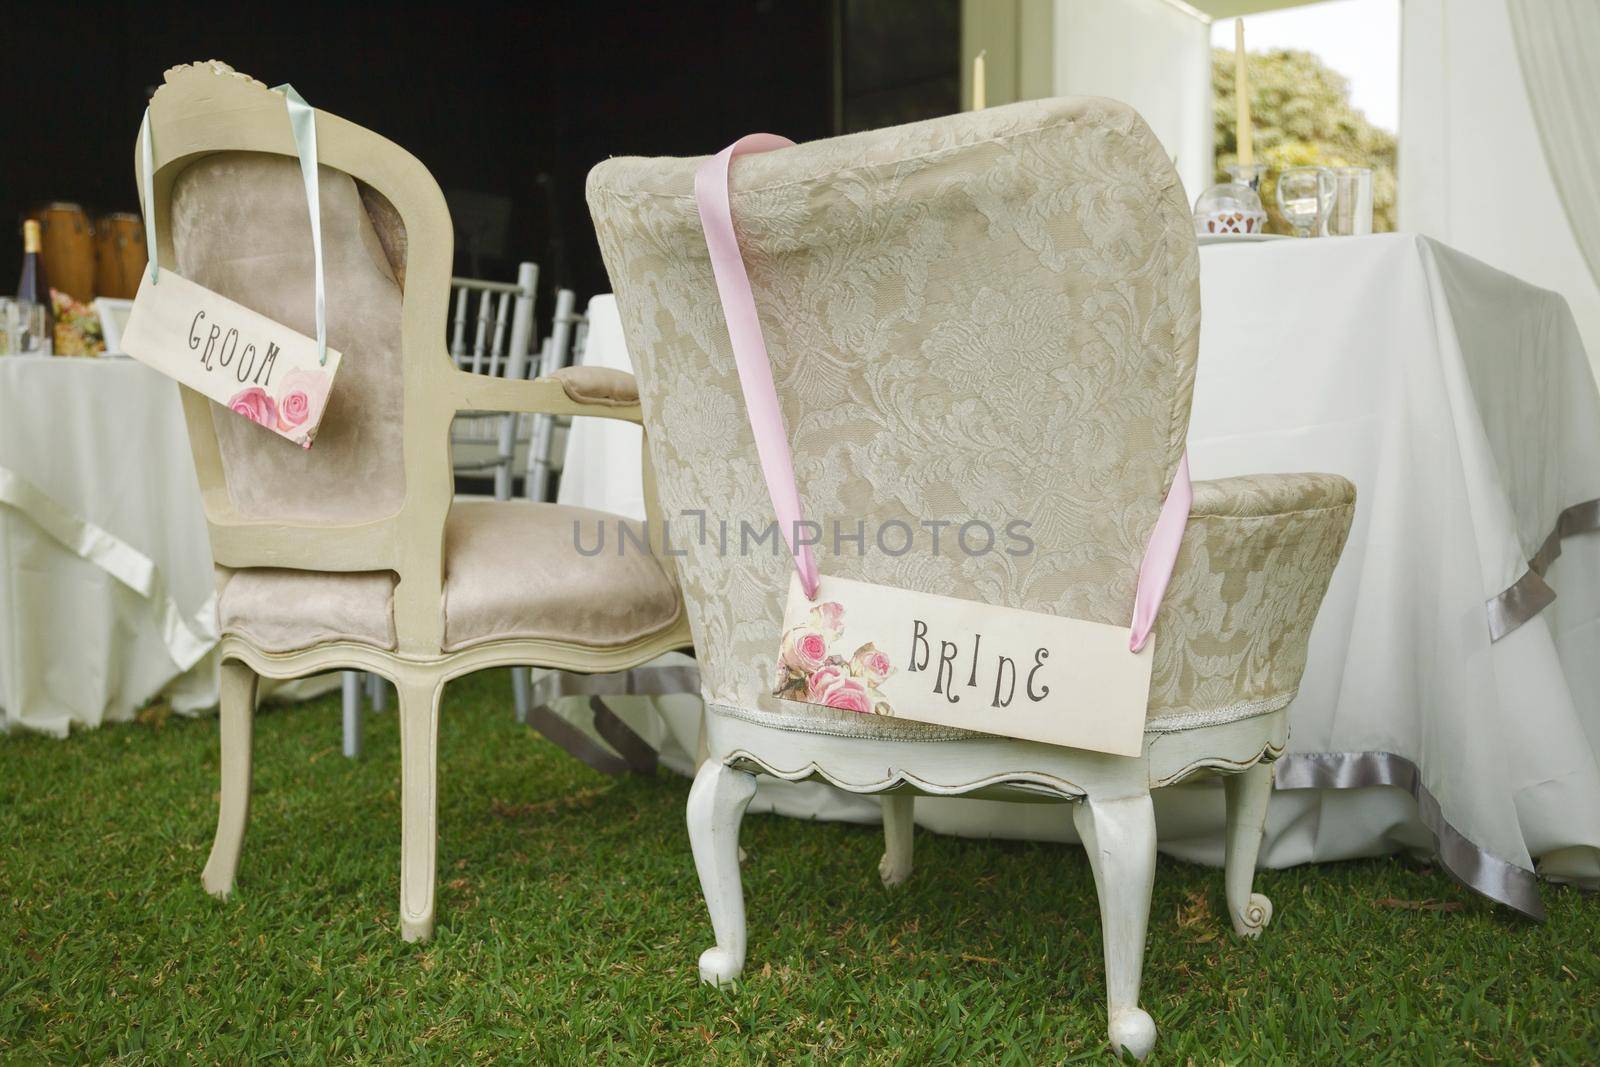 DIY chairs for bride and groom with hand written signs